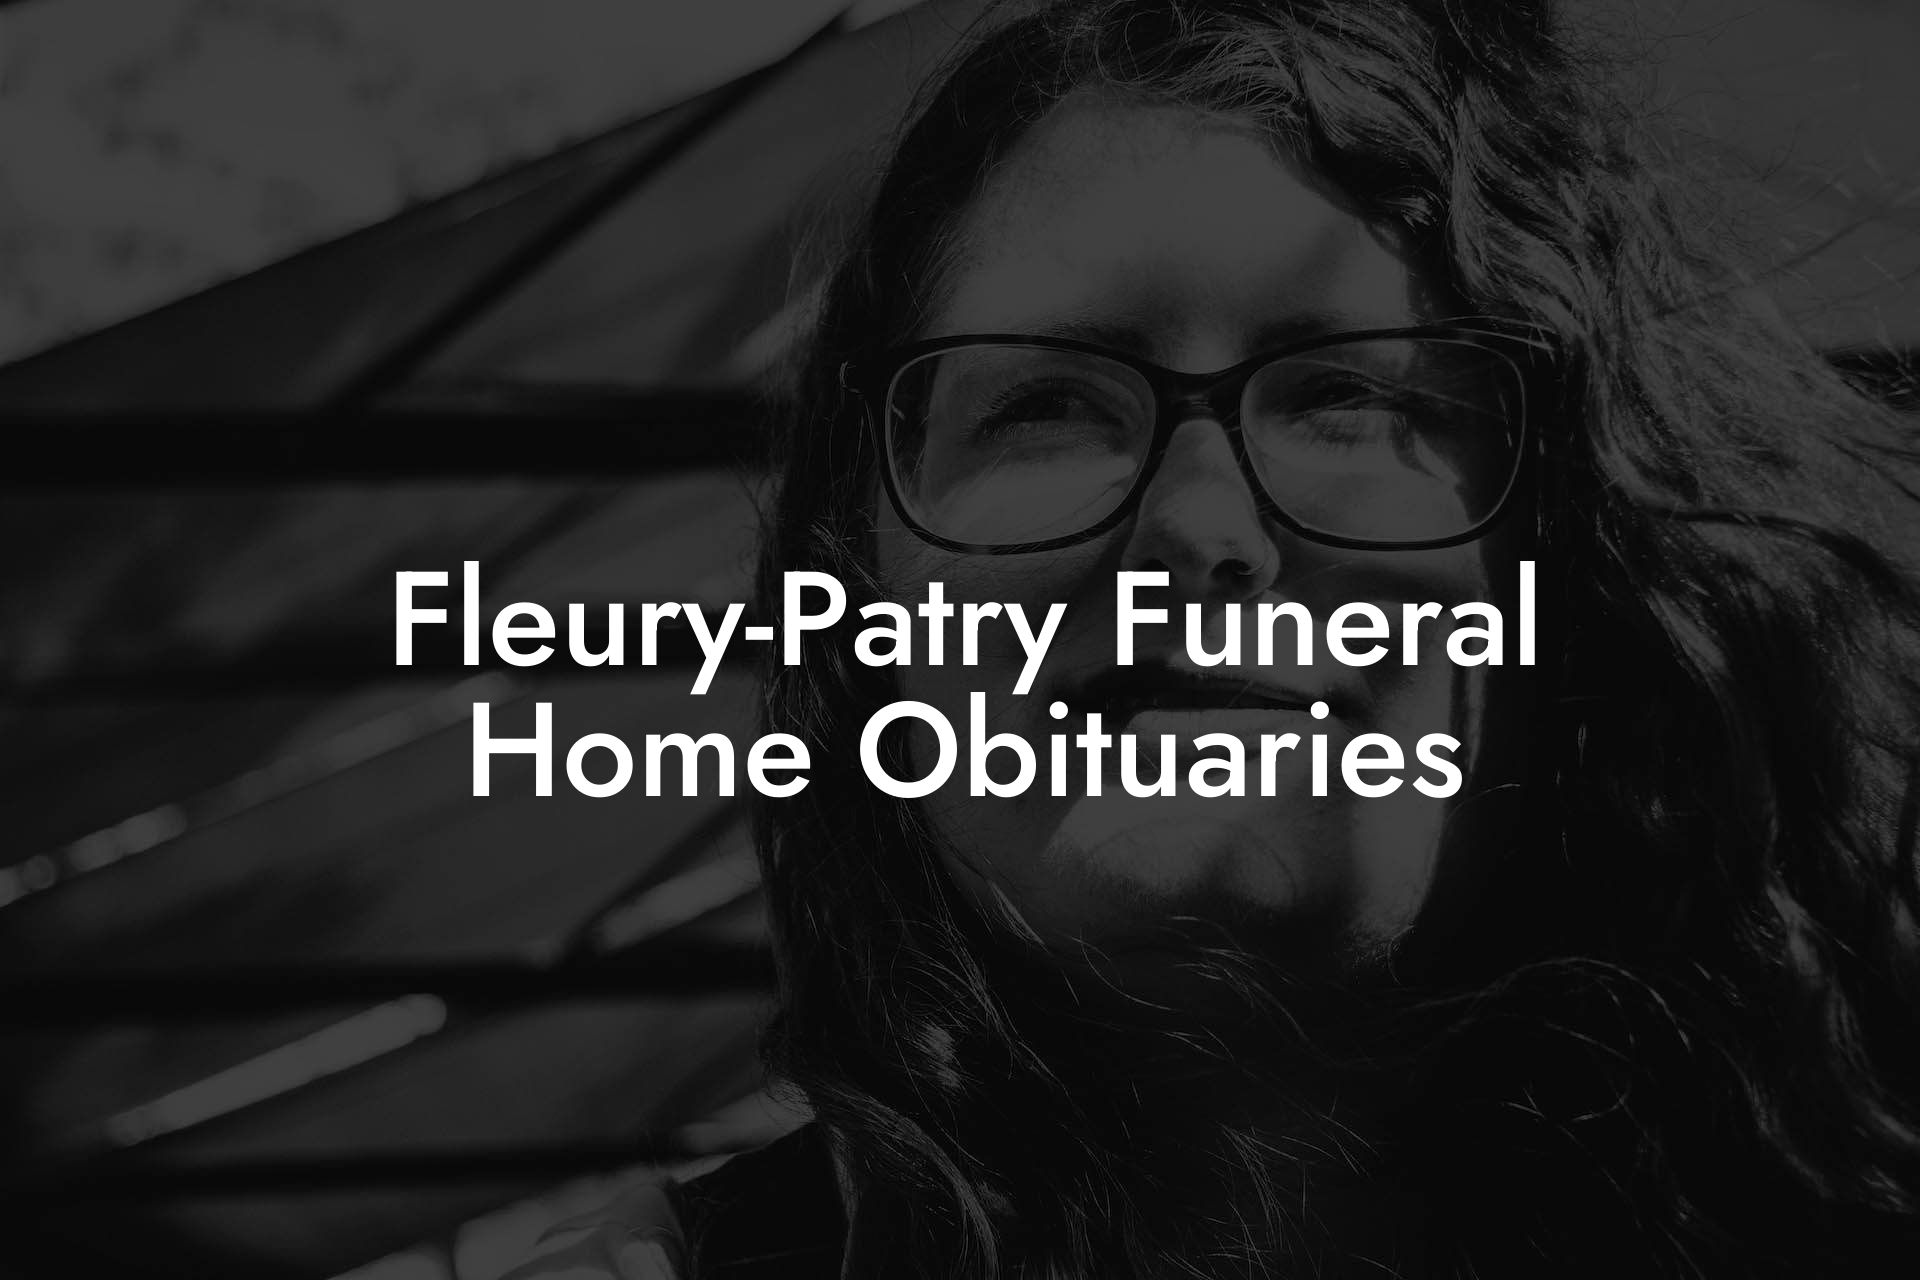 Fleury-Patry Funeral Home Obituaries